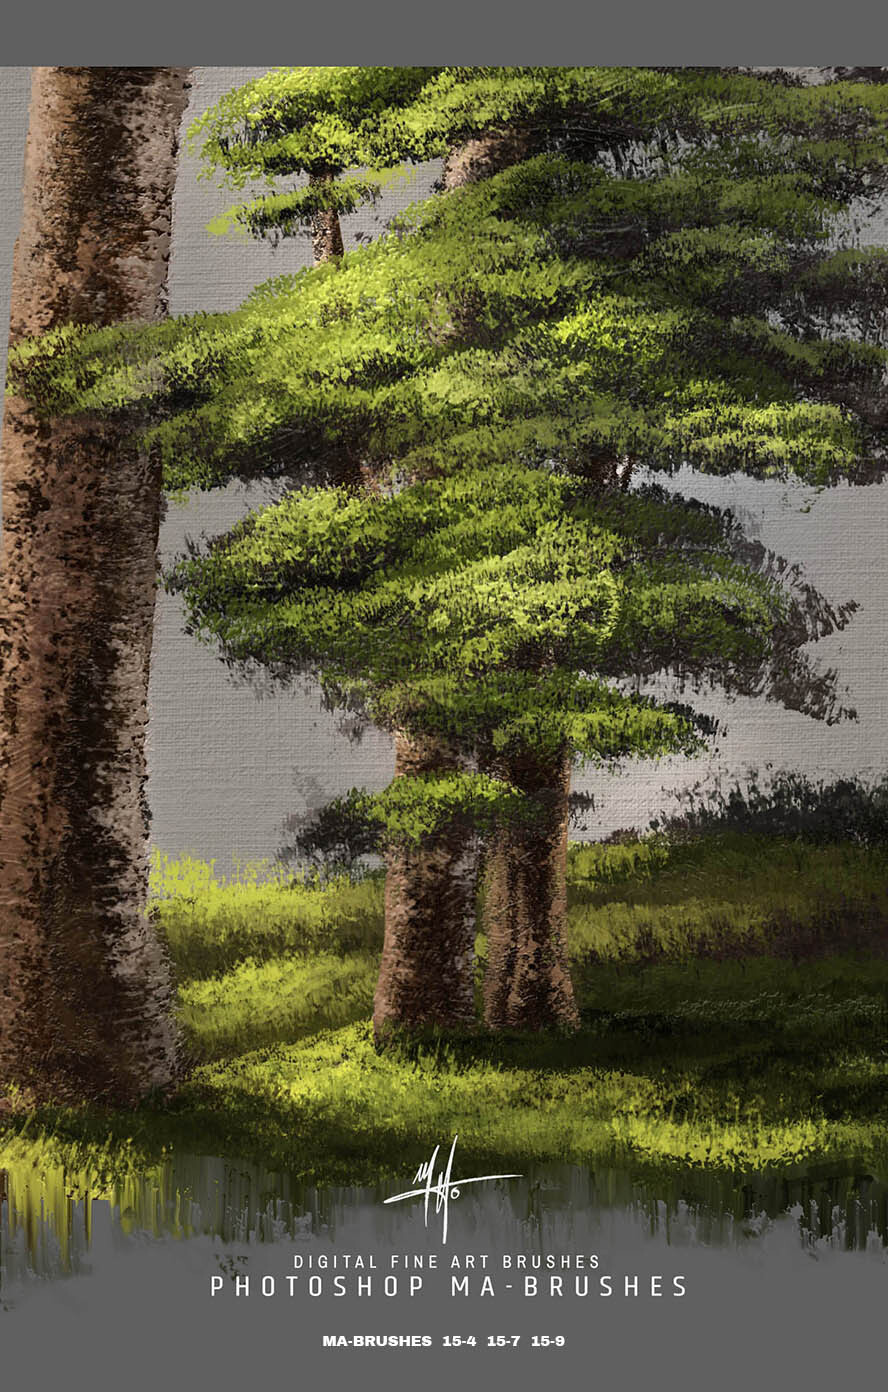 Digital Painting Brushes - Use these Brushes for creating trees like a real Master!